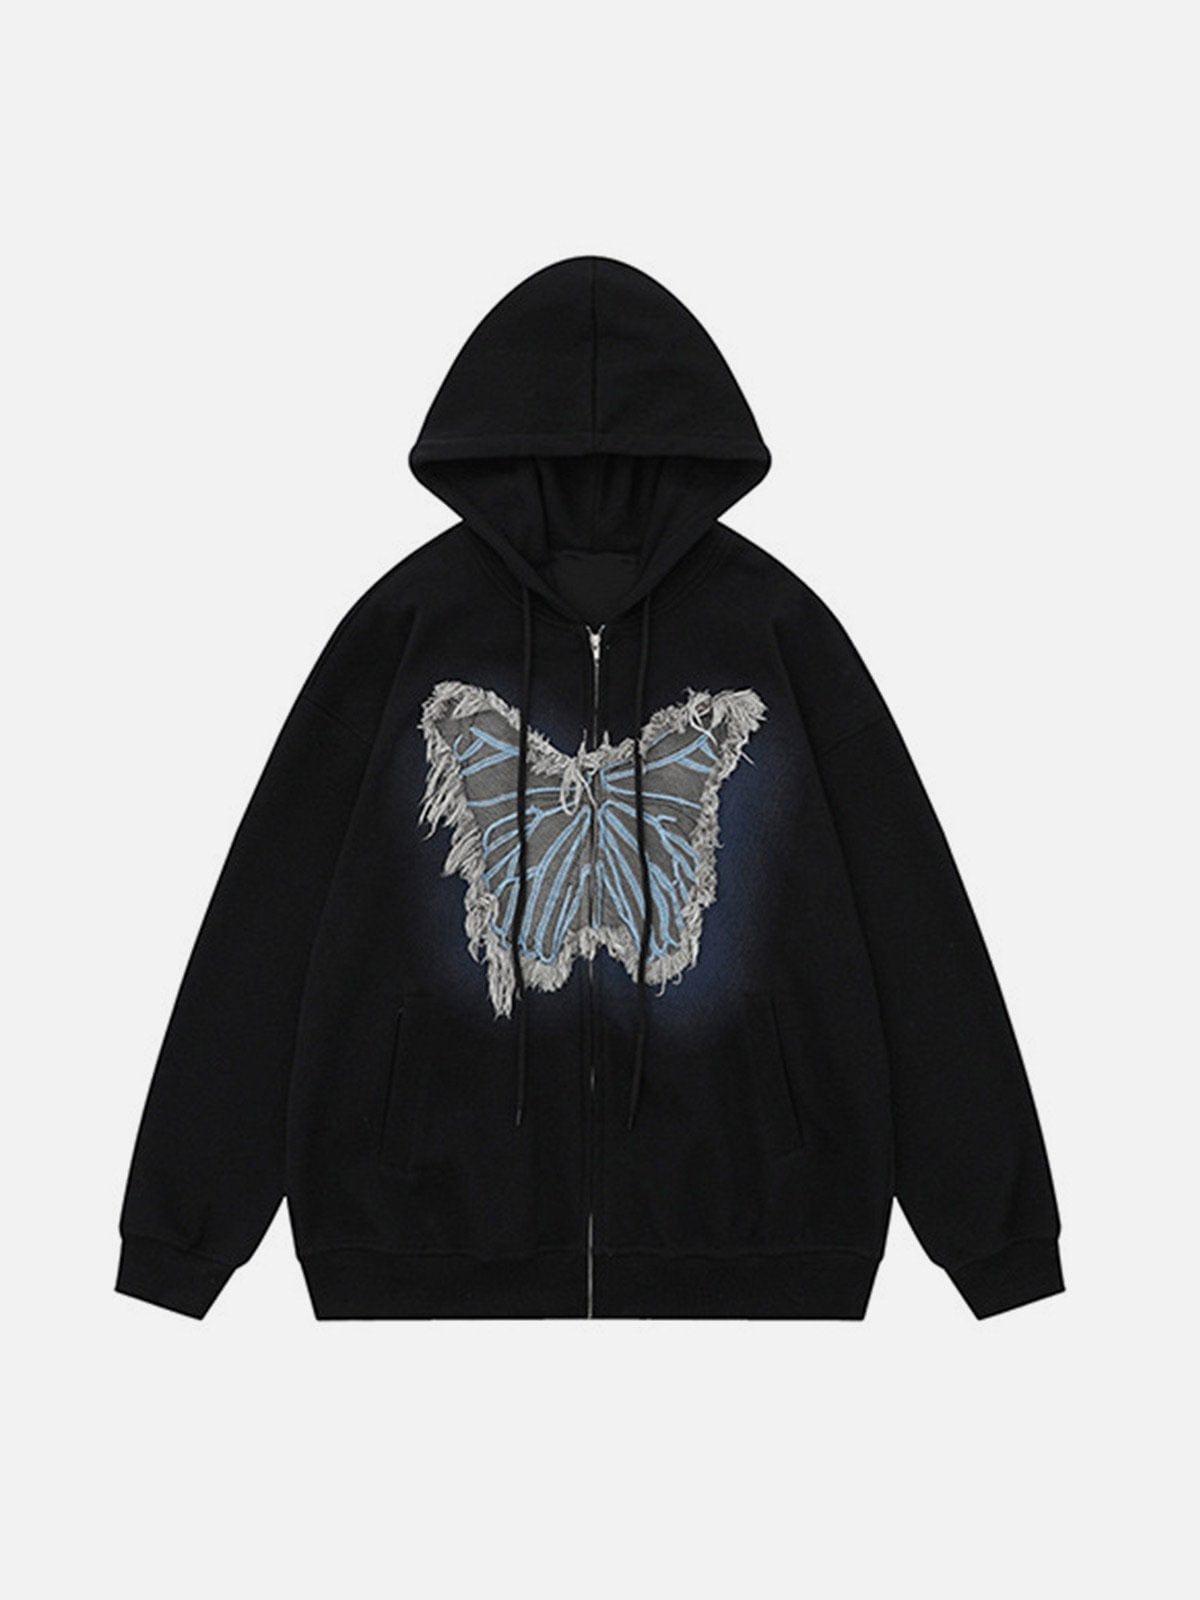 NEV Distressed Butterfly Patch Cardigan Hoodie